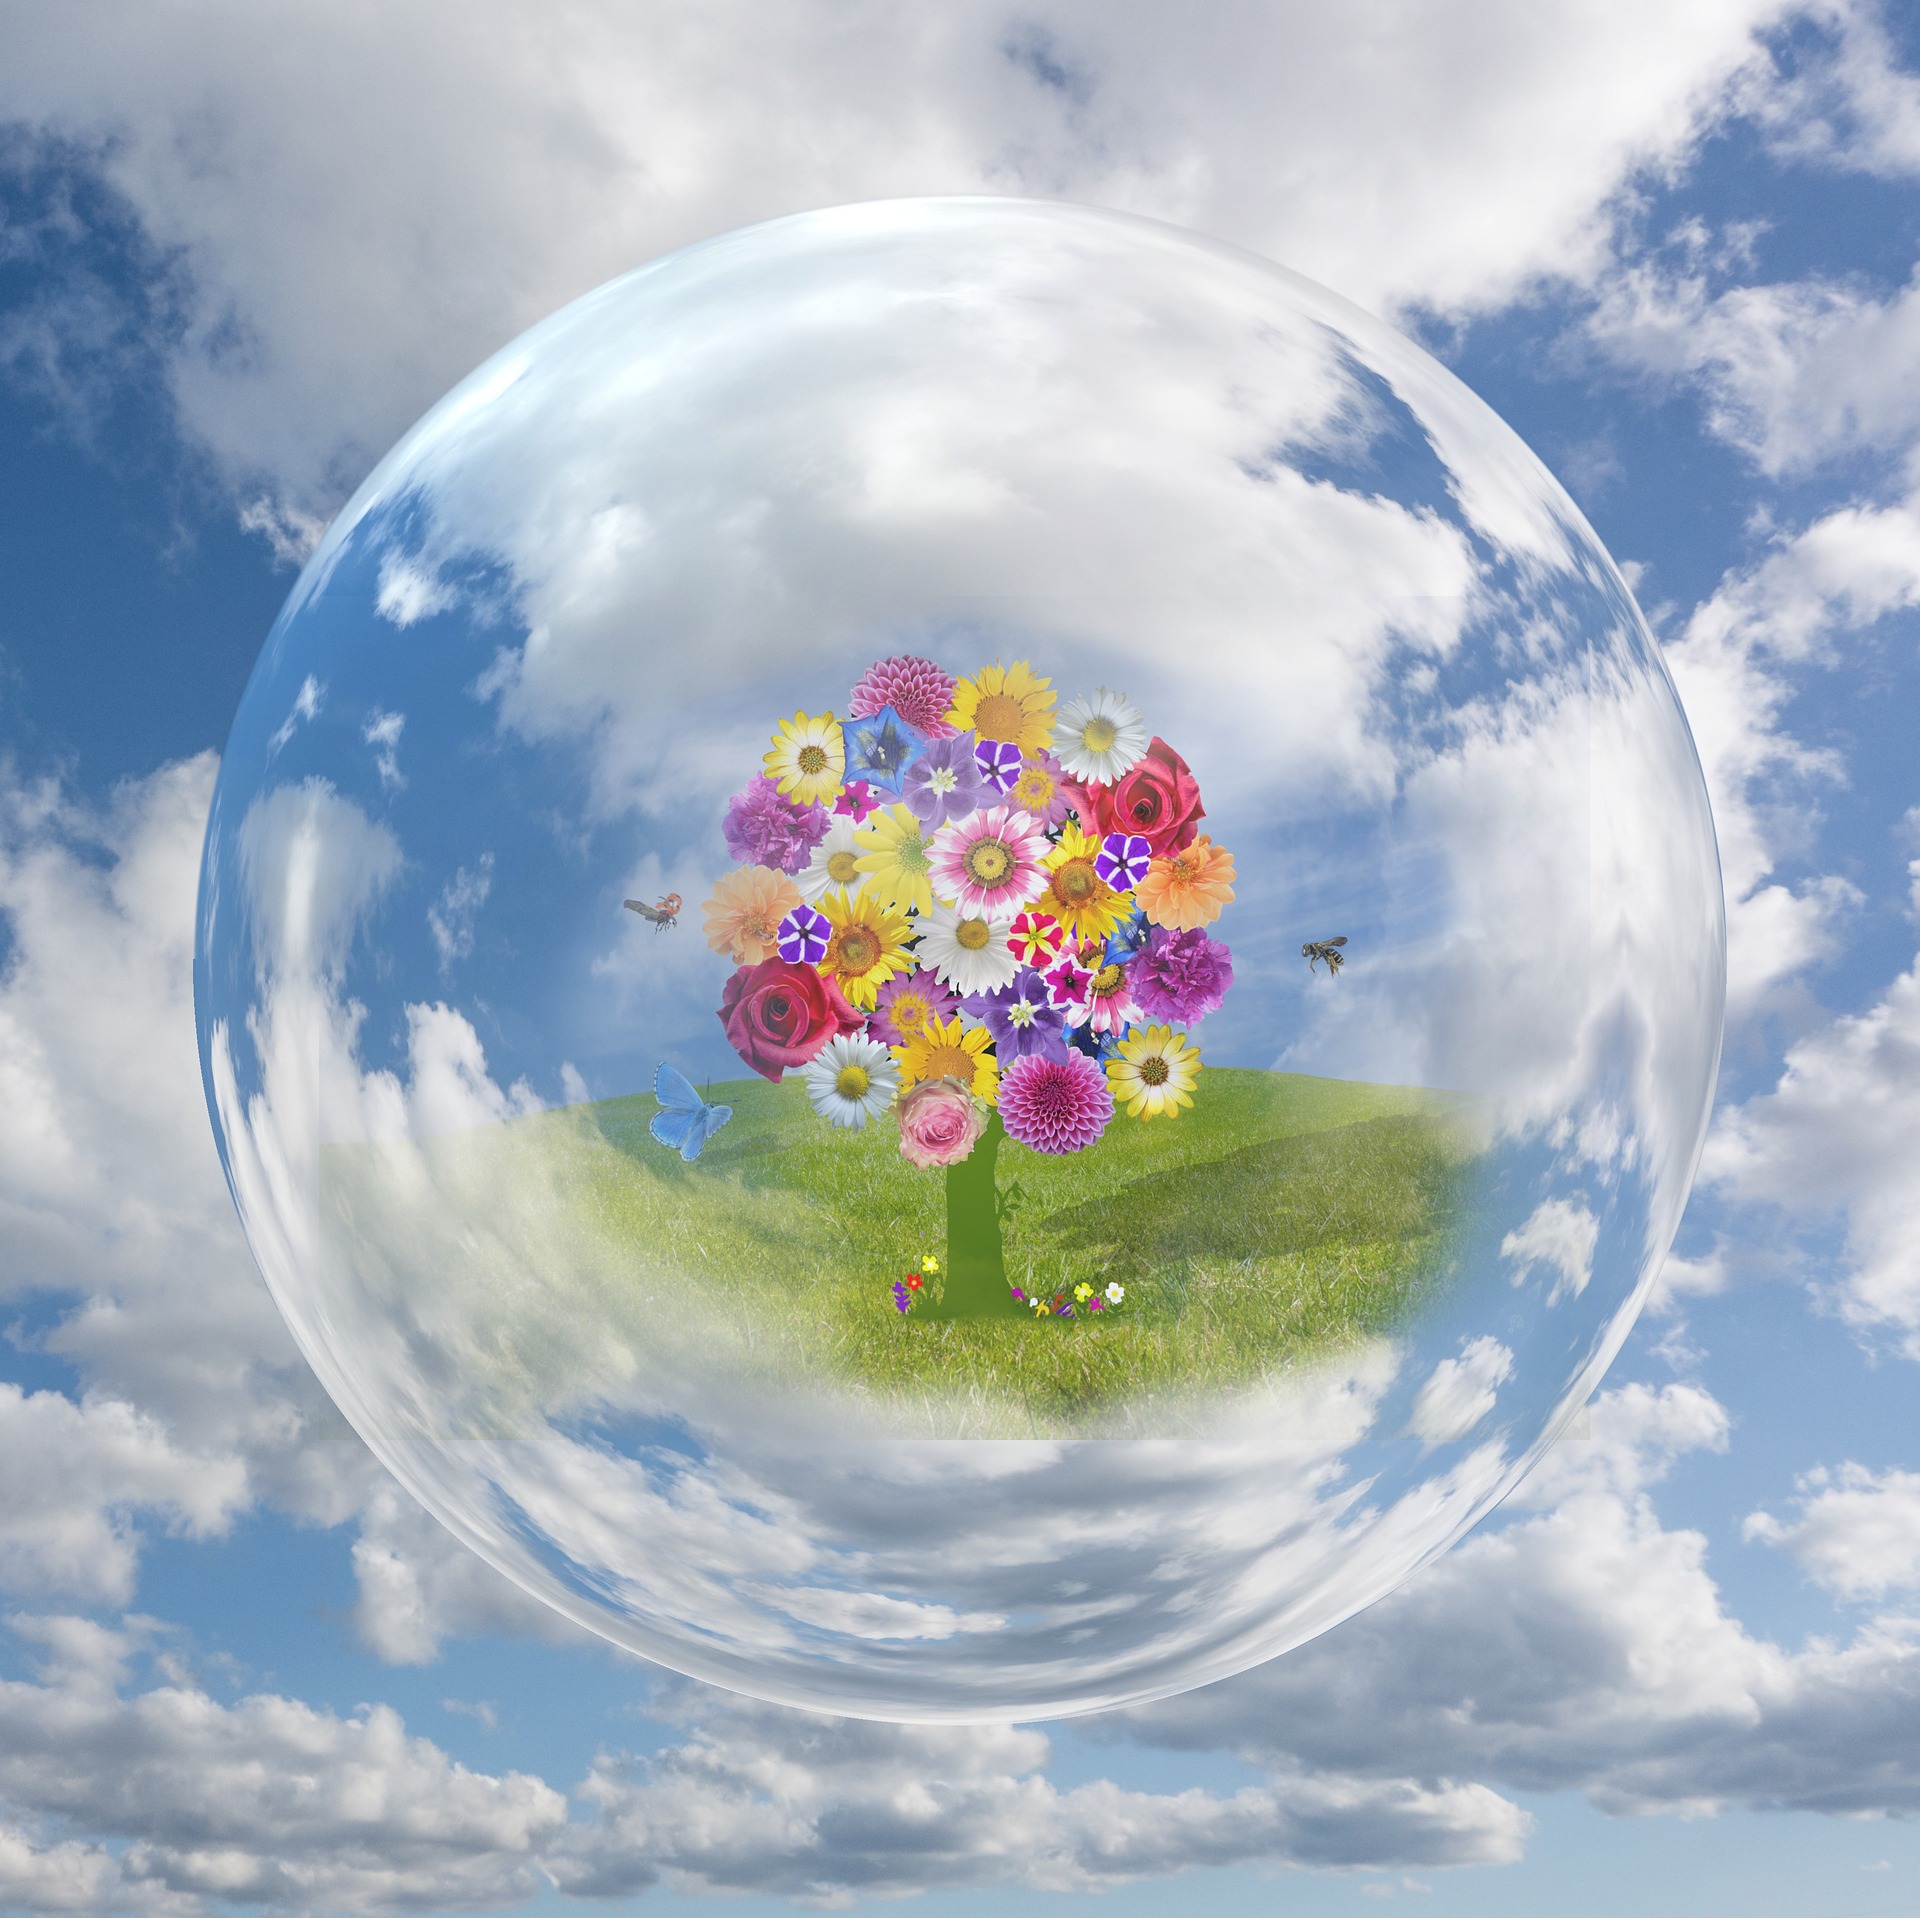 Image shows a large transparent bubble with the sky visible behind it. Inside the bubble are wild flowers and butterflies